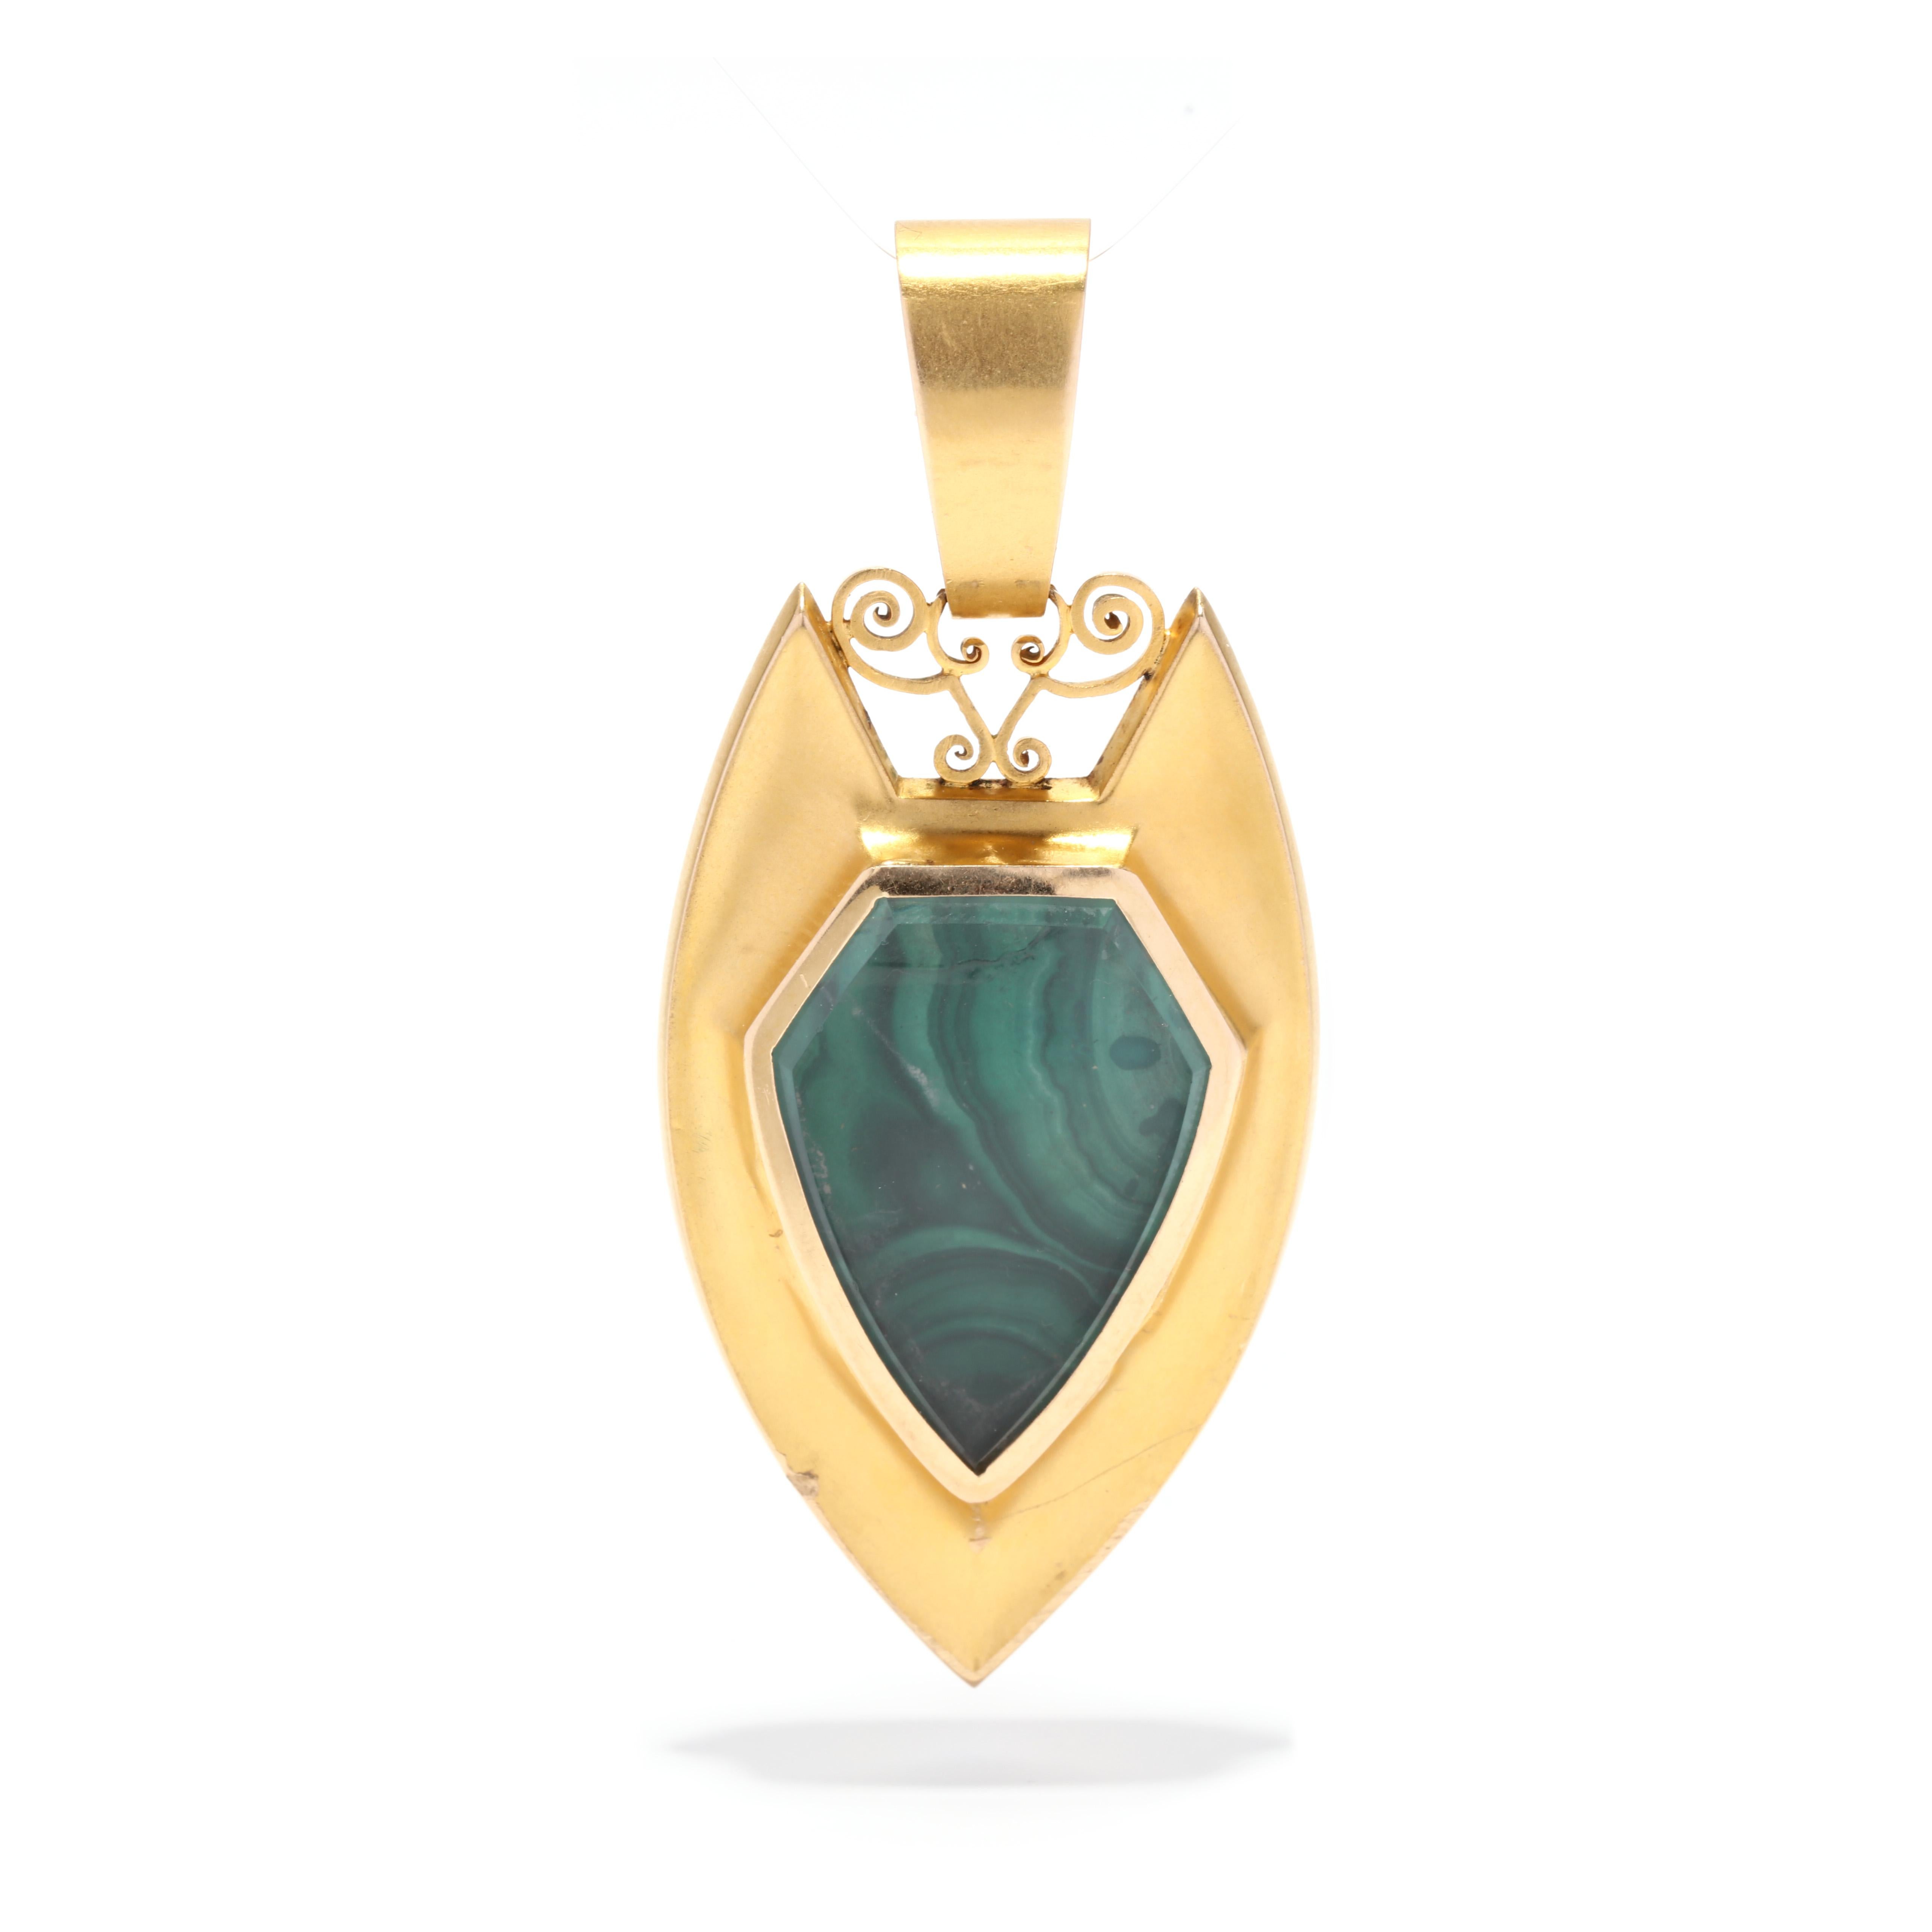 An antique malachite shield locket pendant. This Etruscan revival pendant features a pointed shield motif set with a shield cut natural malachite center stone surrounded by raised gold scroll detailing, a glass locket on the reverse and with a large